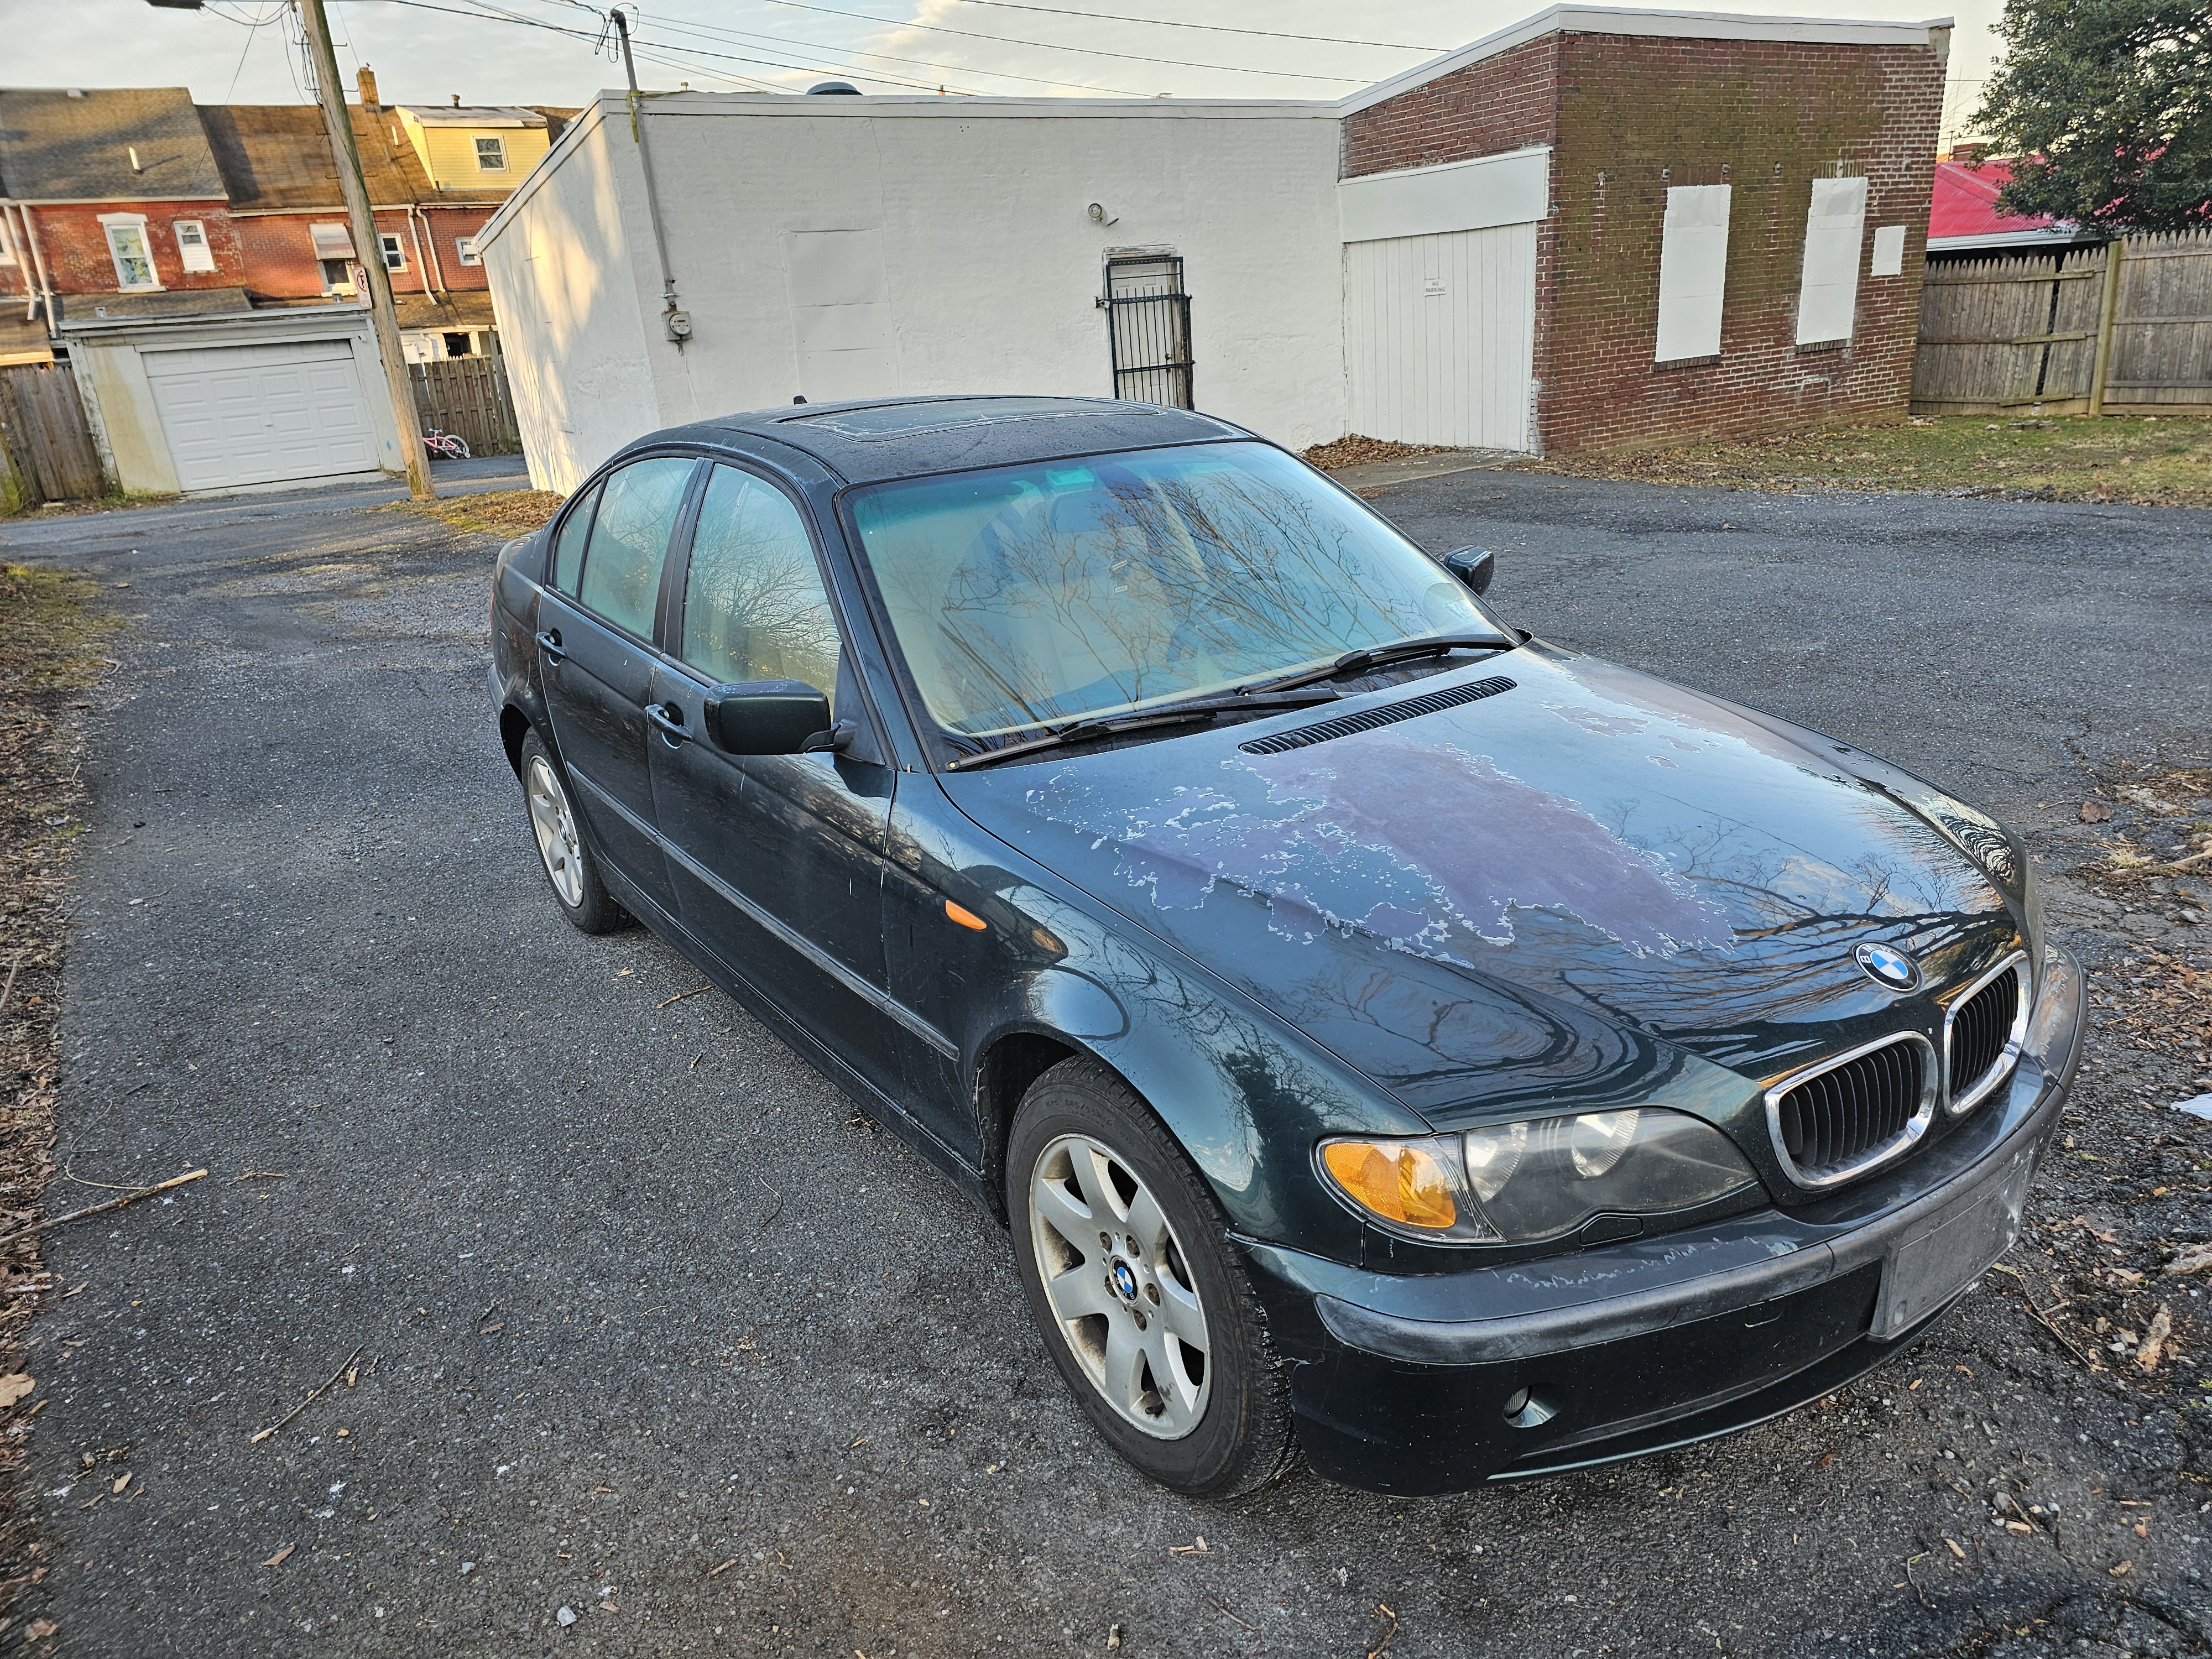 I Spent $3,000 On A BMW With 234,000 Miles And It's The Best Car I